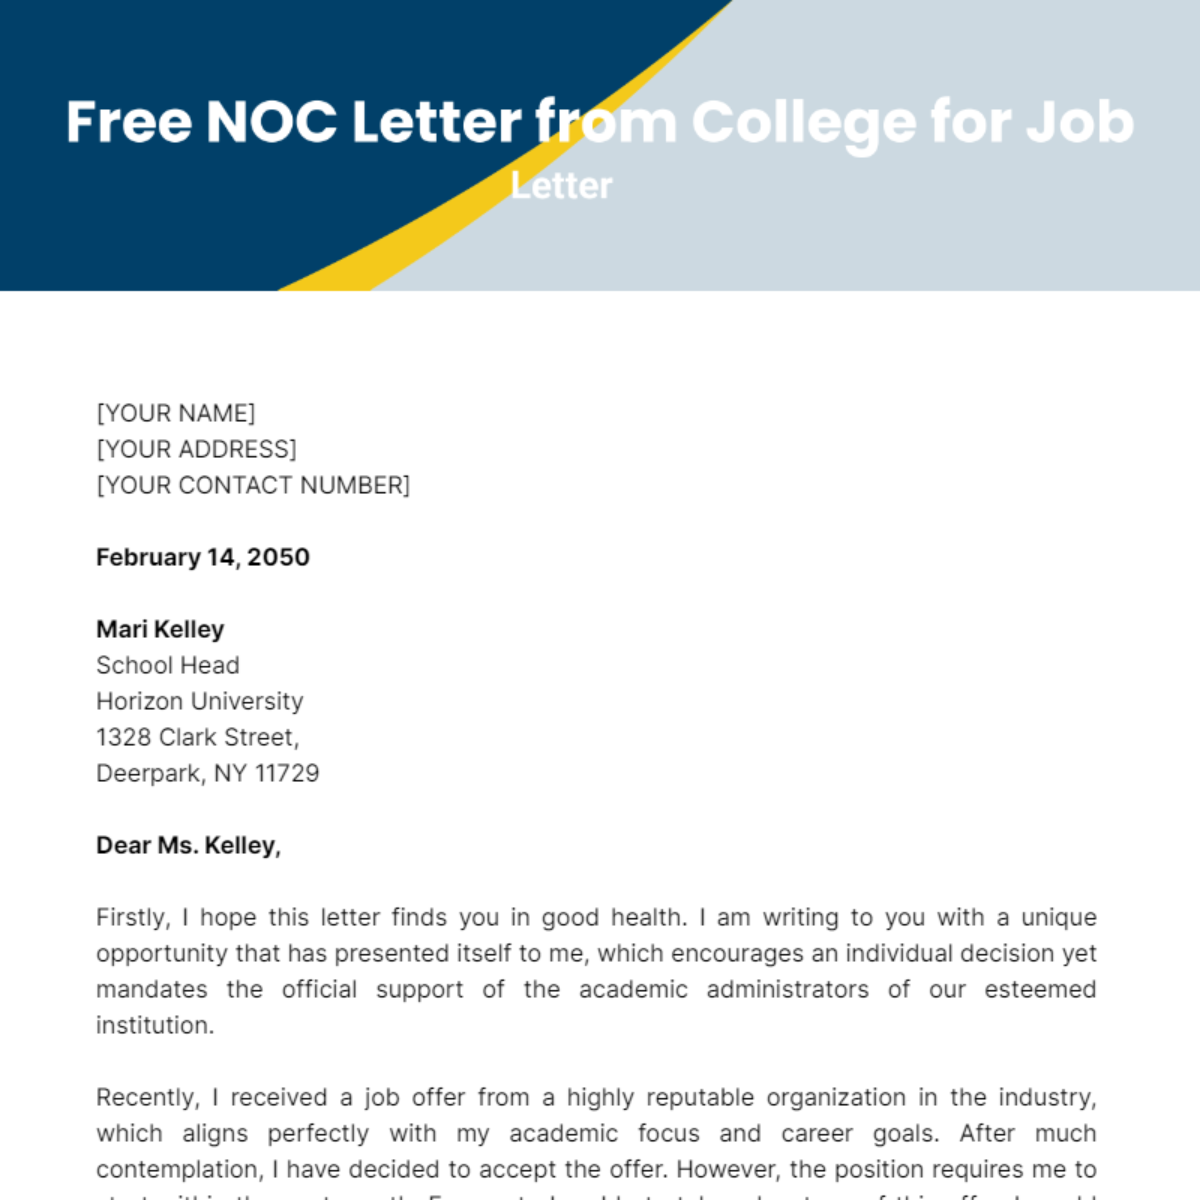 NOC Letter from College for Job Template